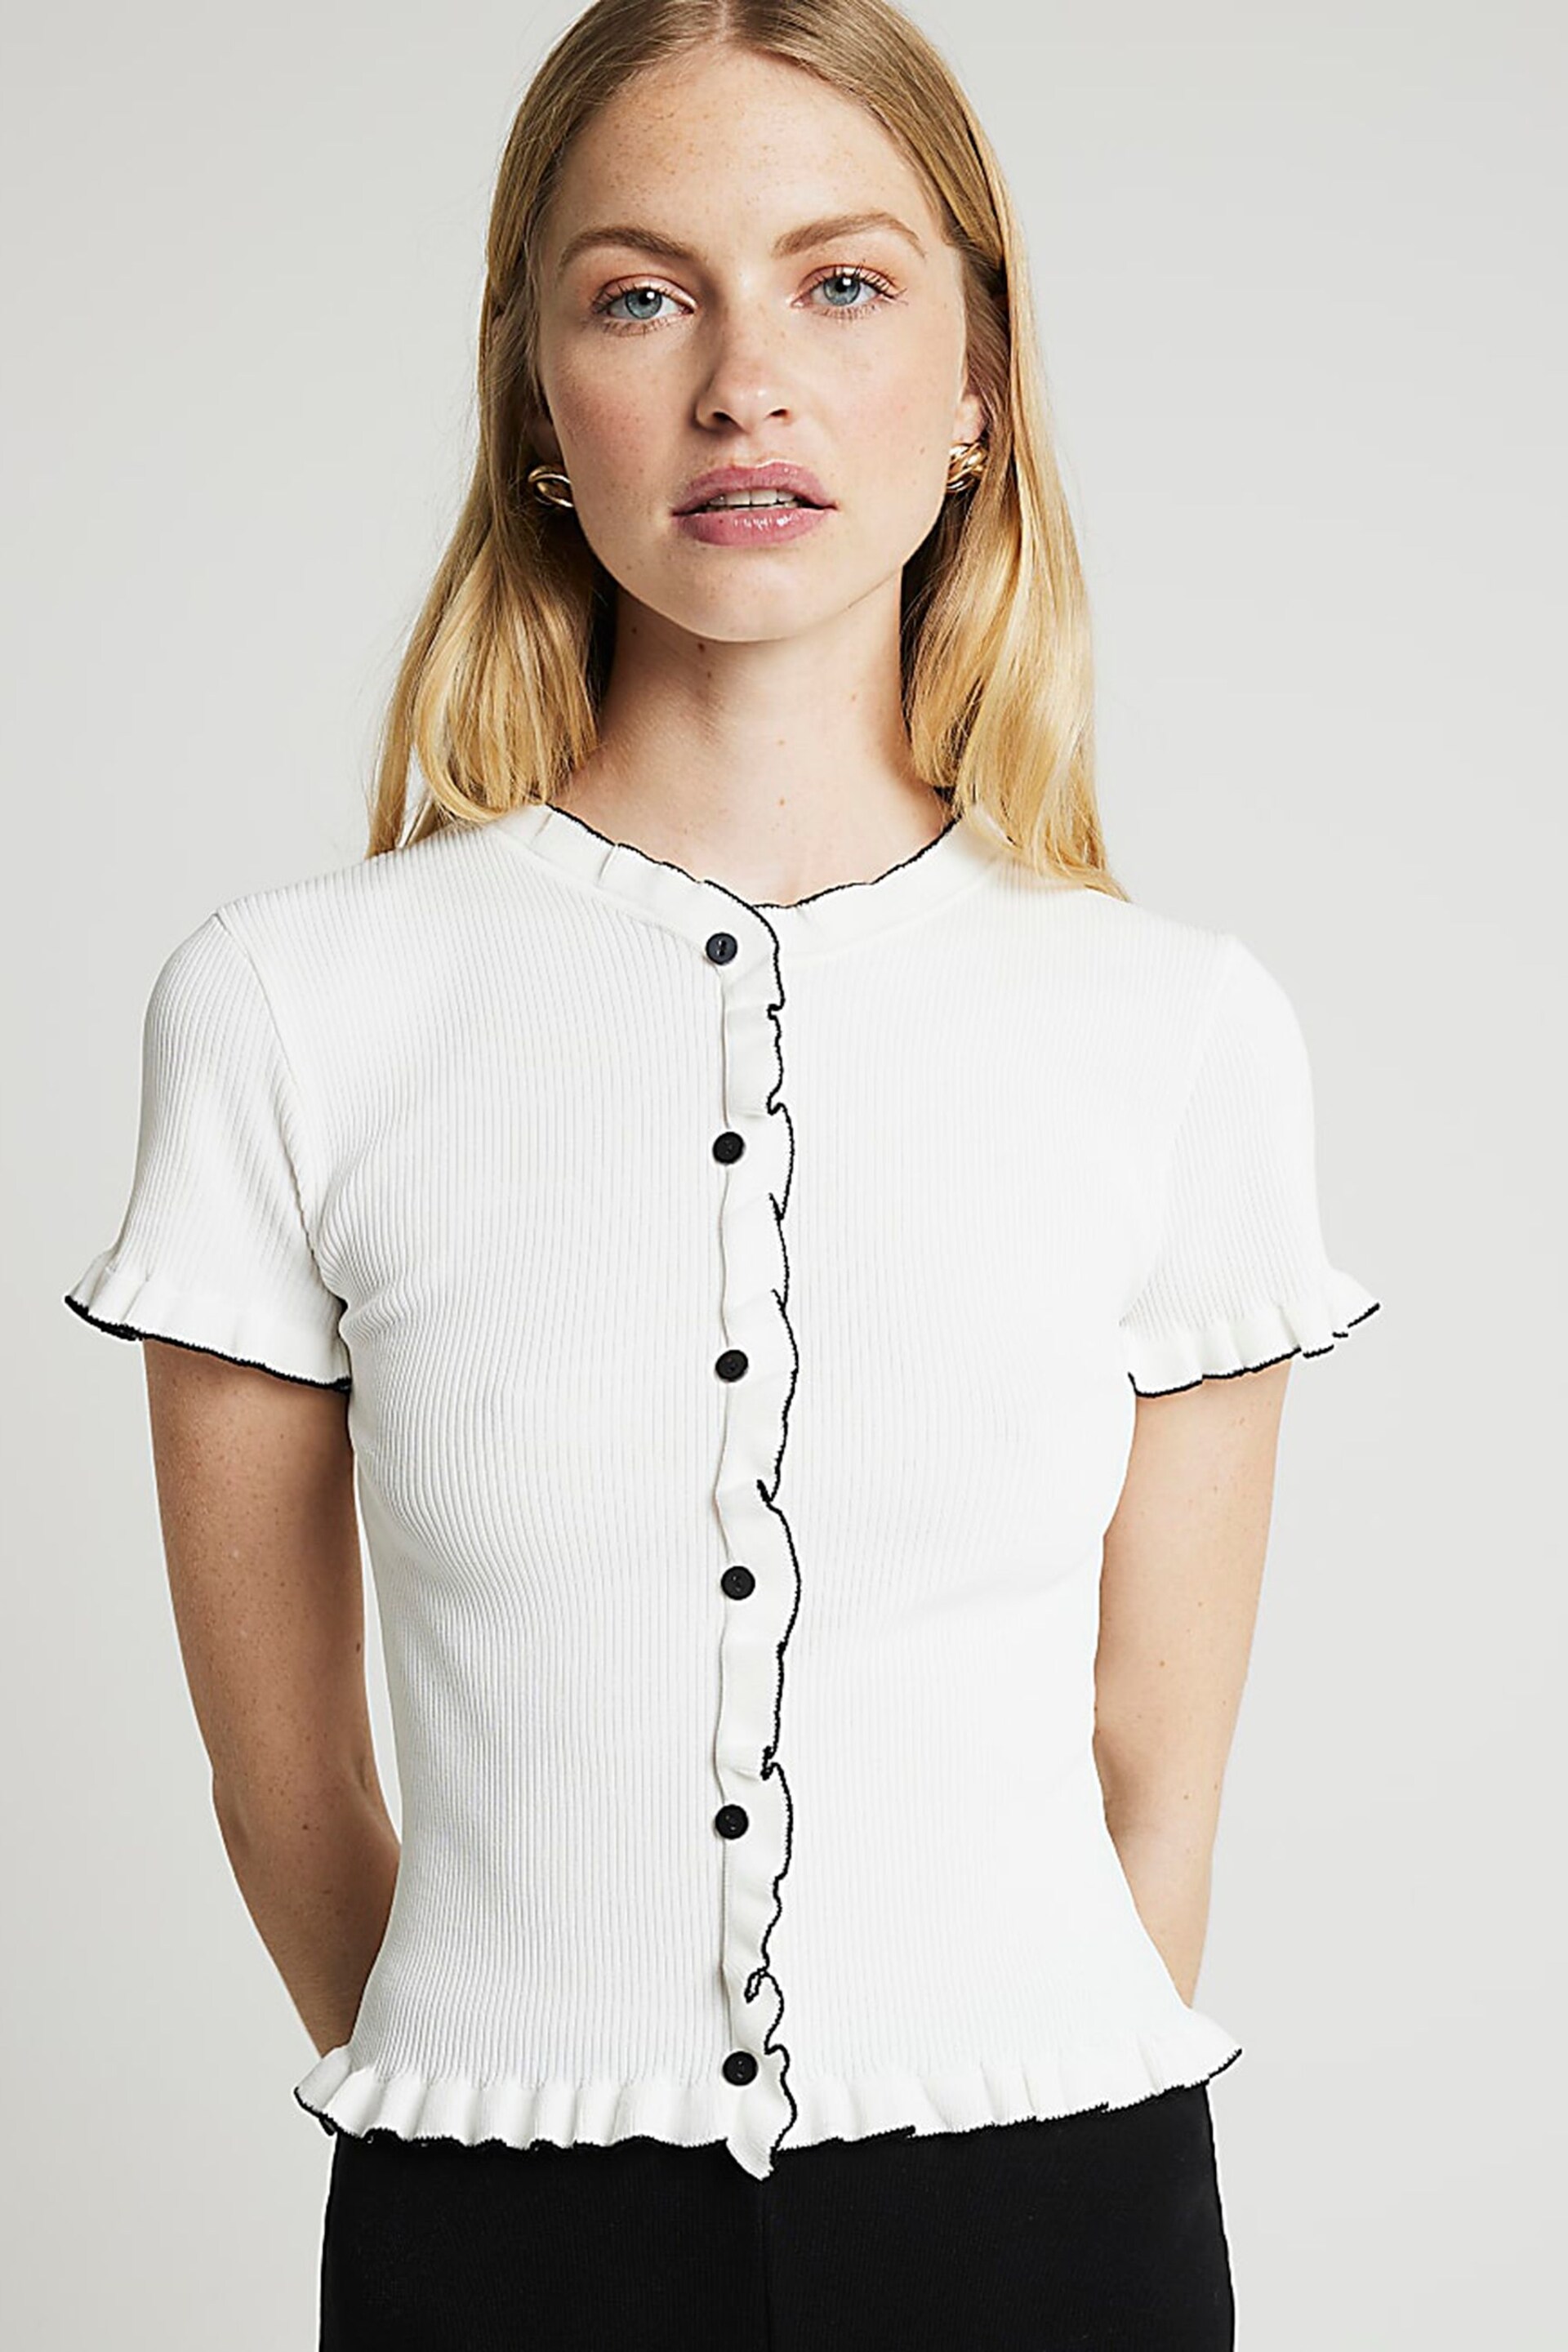 River Island Cream Frill Button Front Knitted T-Shirt - Image 1 of 6